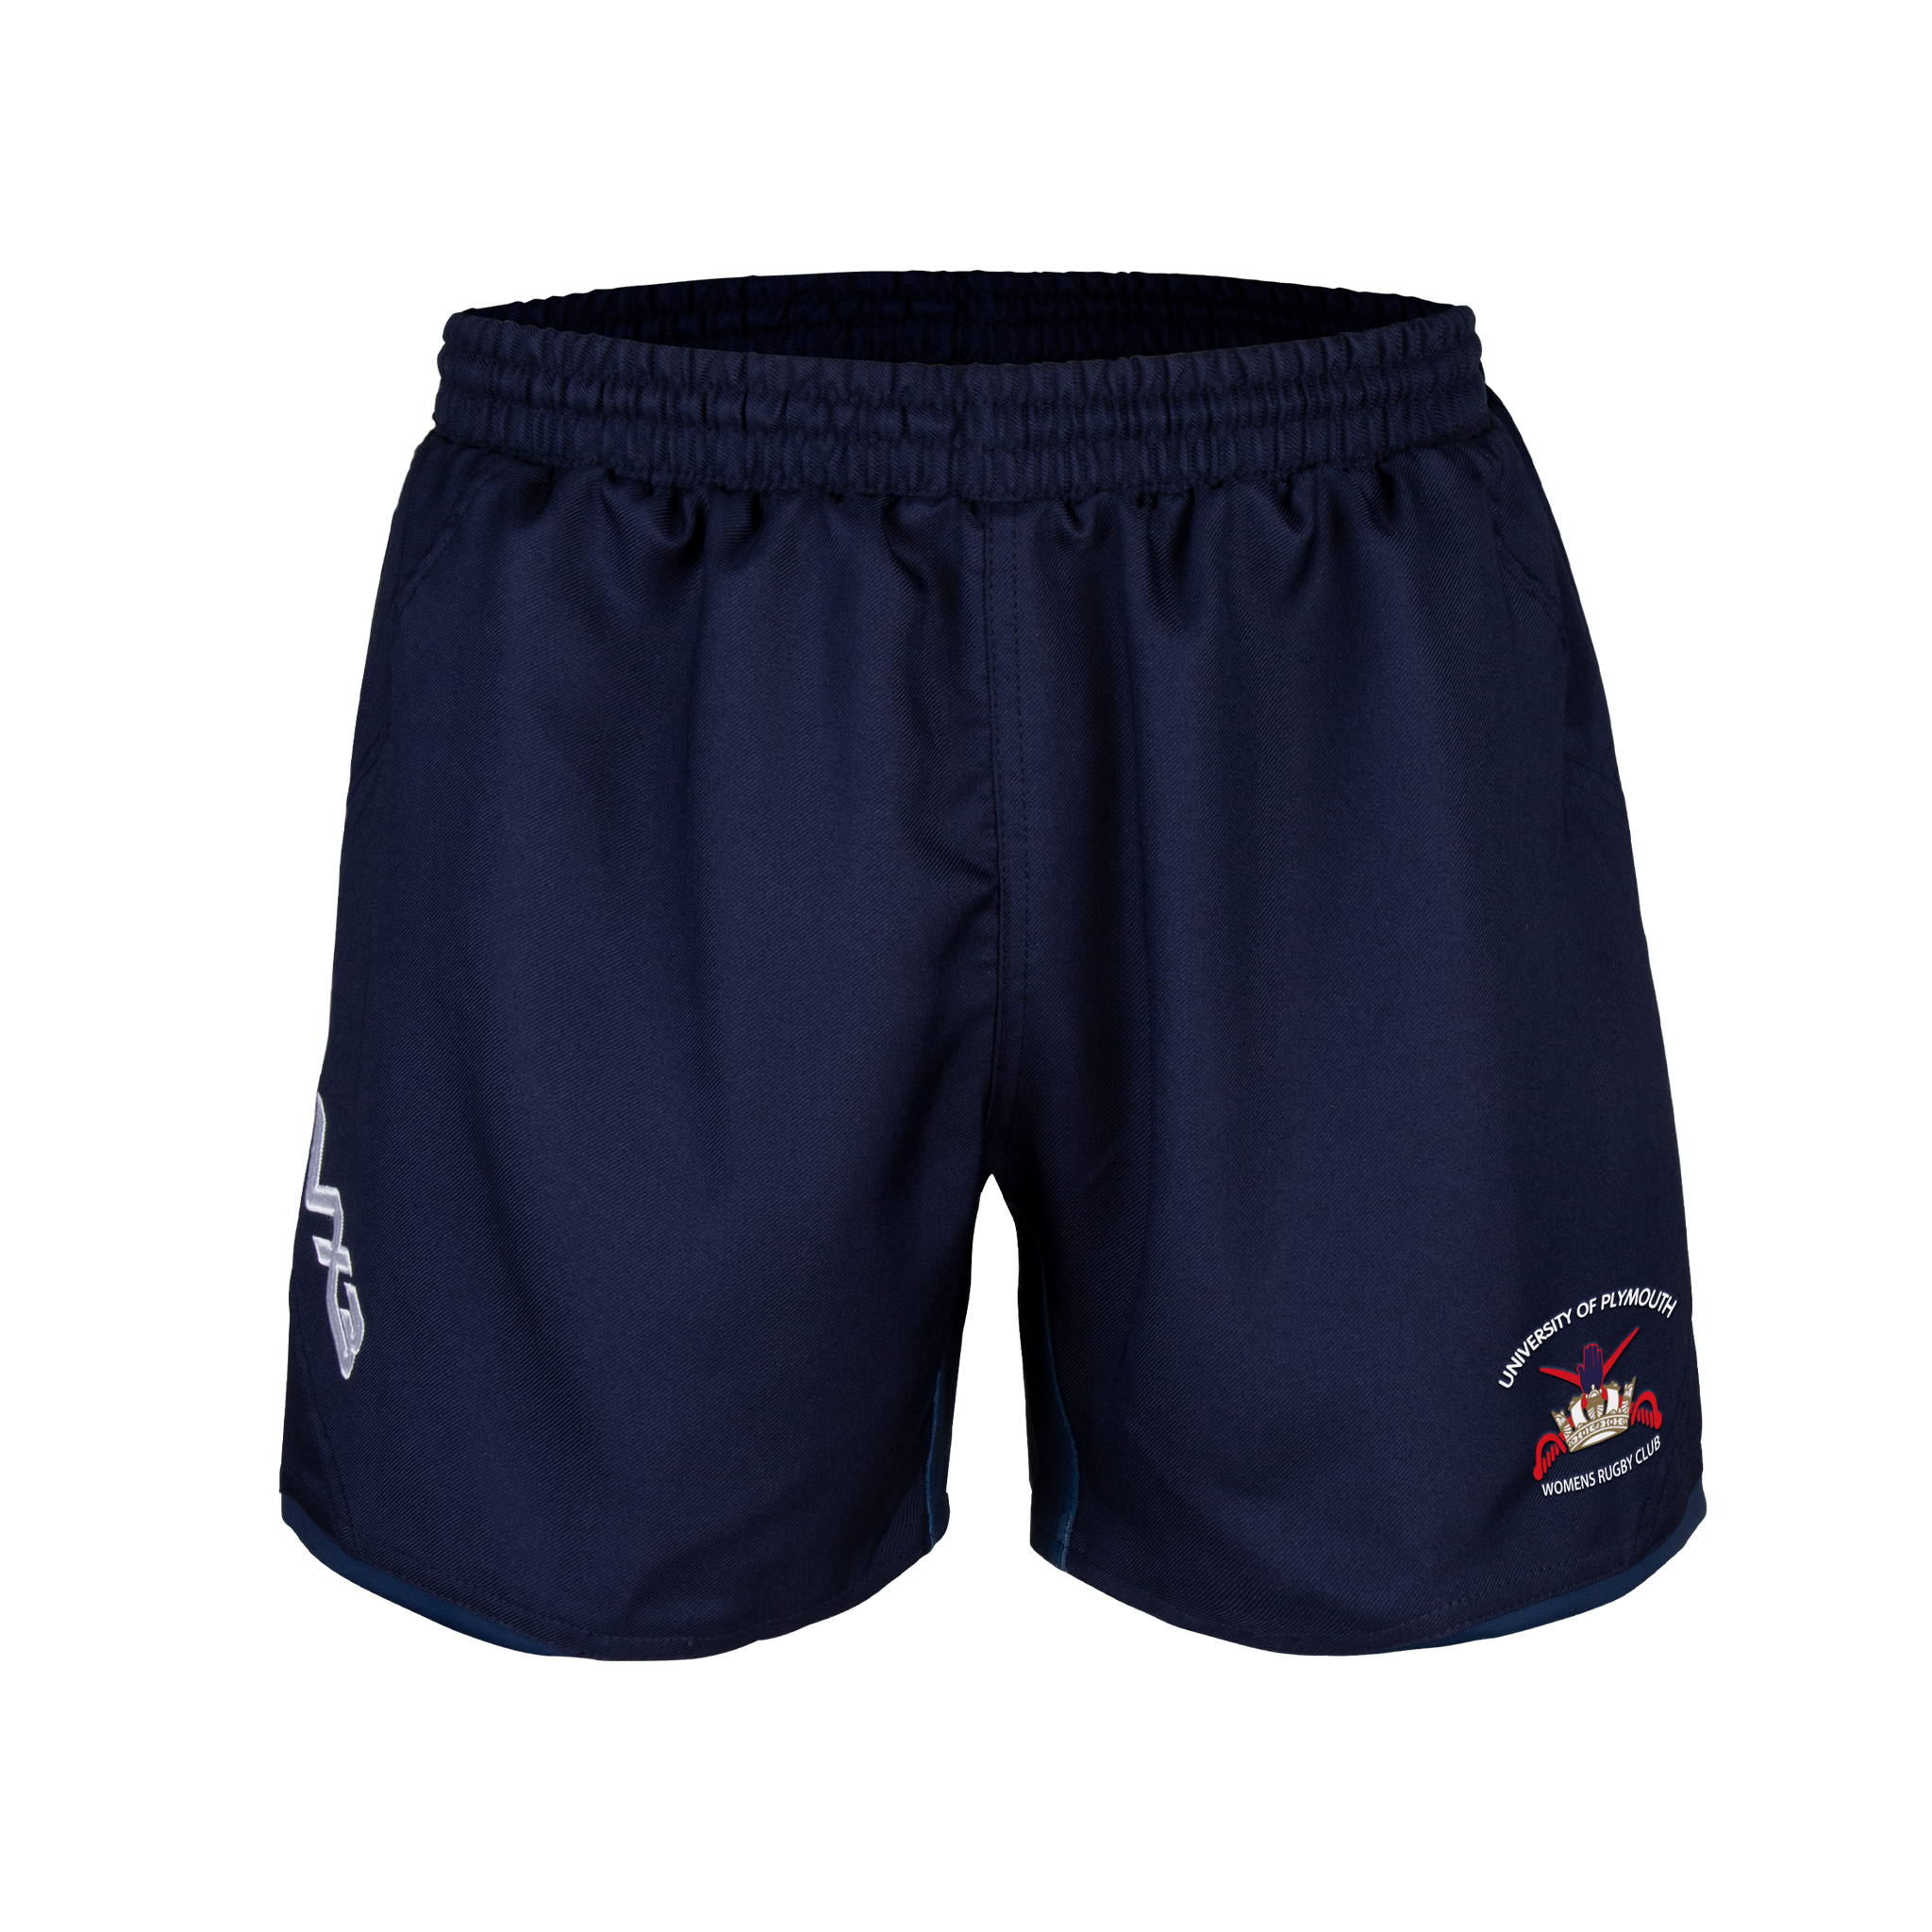 Plymouth University Women's Rugby Prima Youth Rugby Shorts